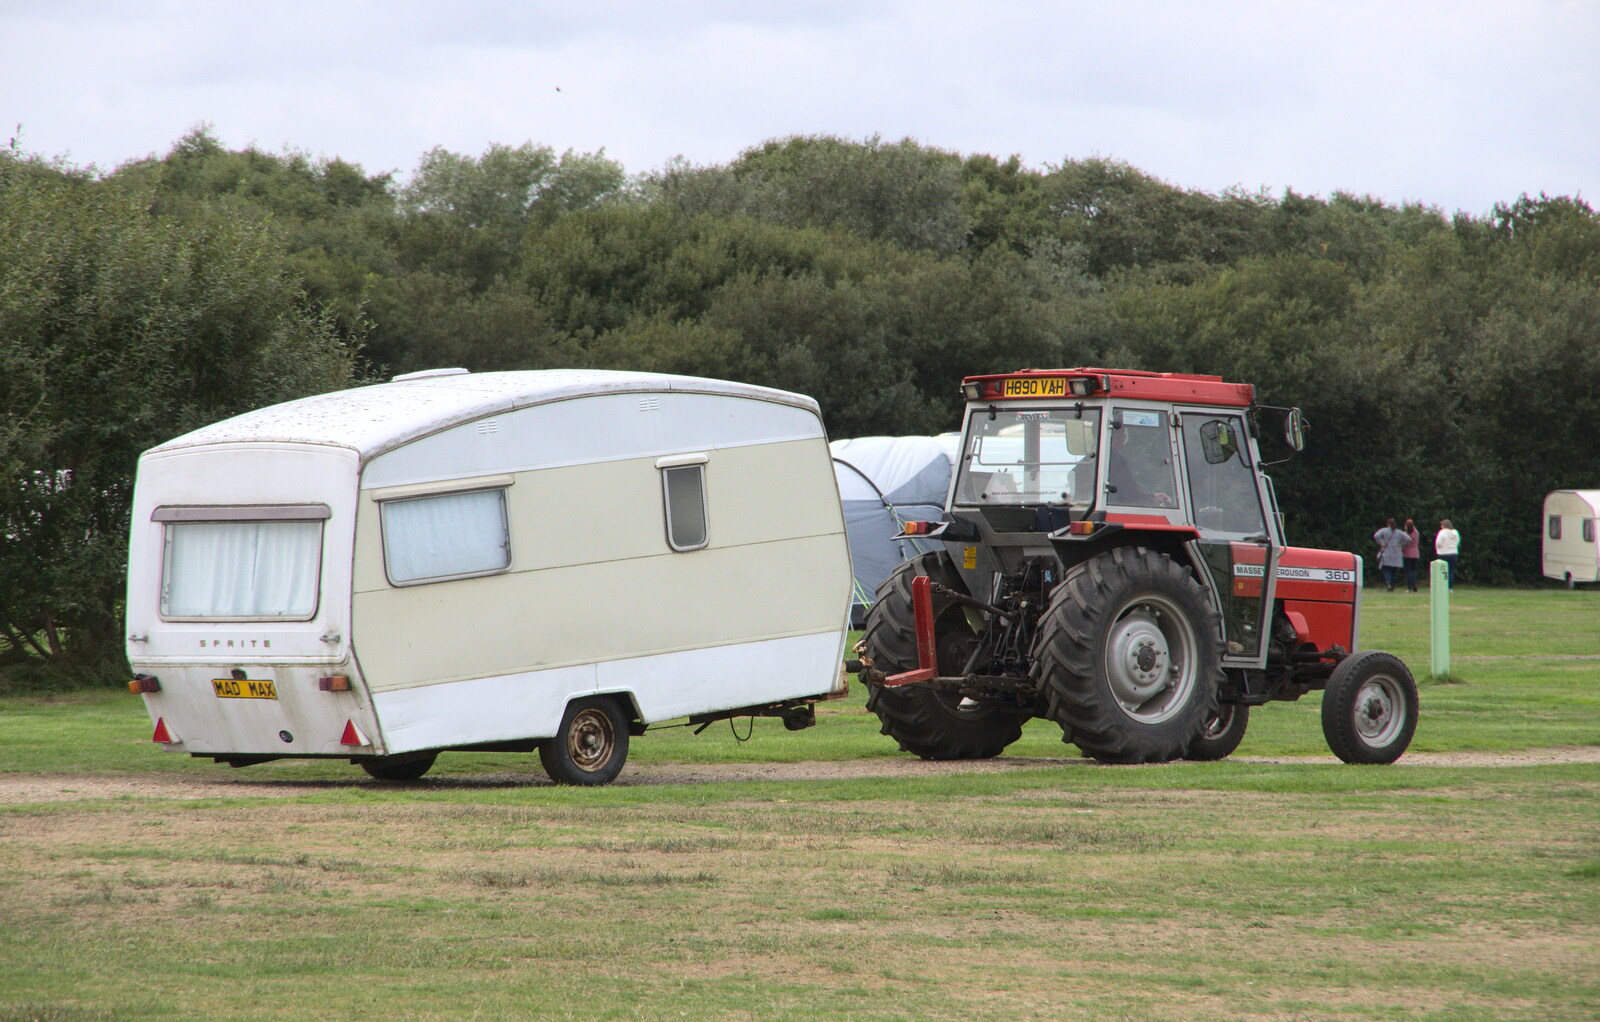 A caravan gets towed away for the winter from An Optimistic Camping Weekend, Waxham Sands, Norfolk - 22nd September 2018